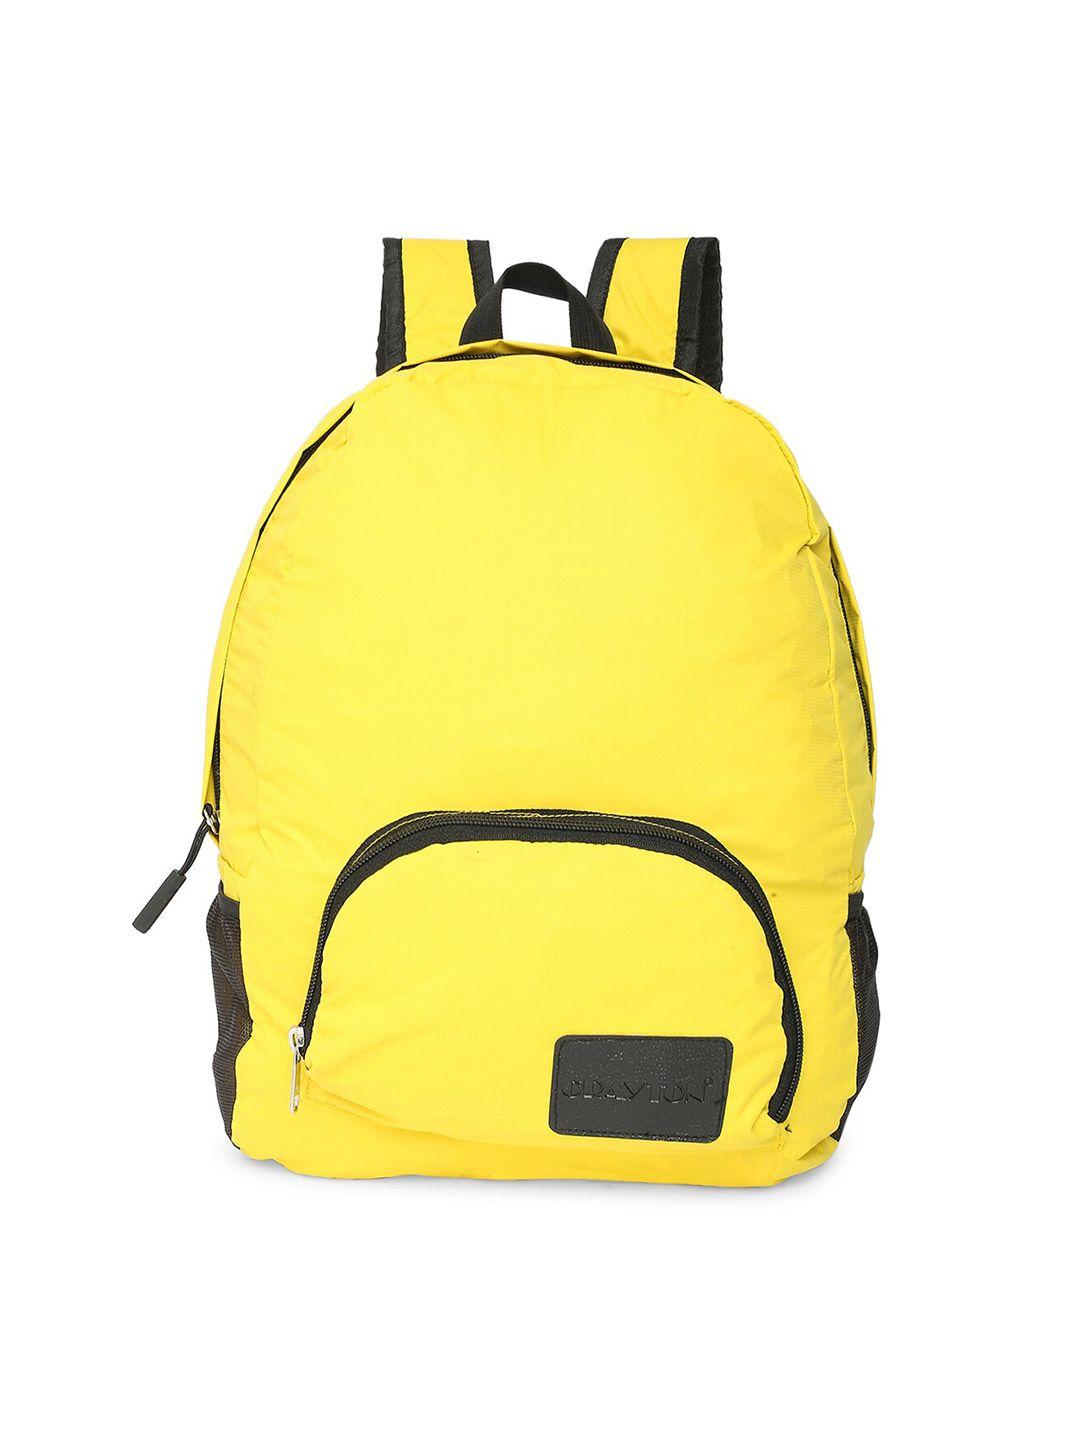 crayton unisex yellow & black backpack with compression straps